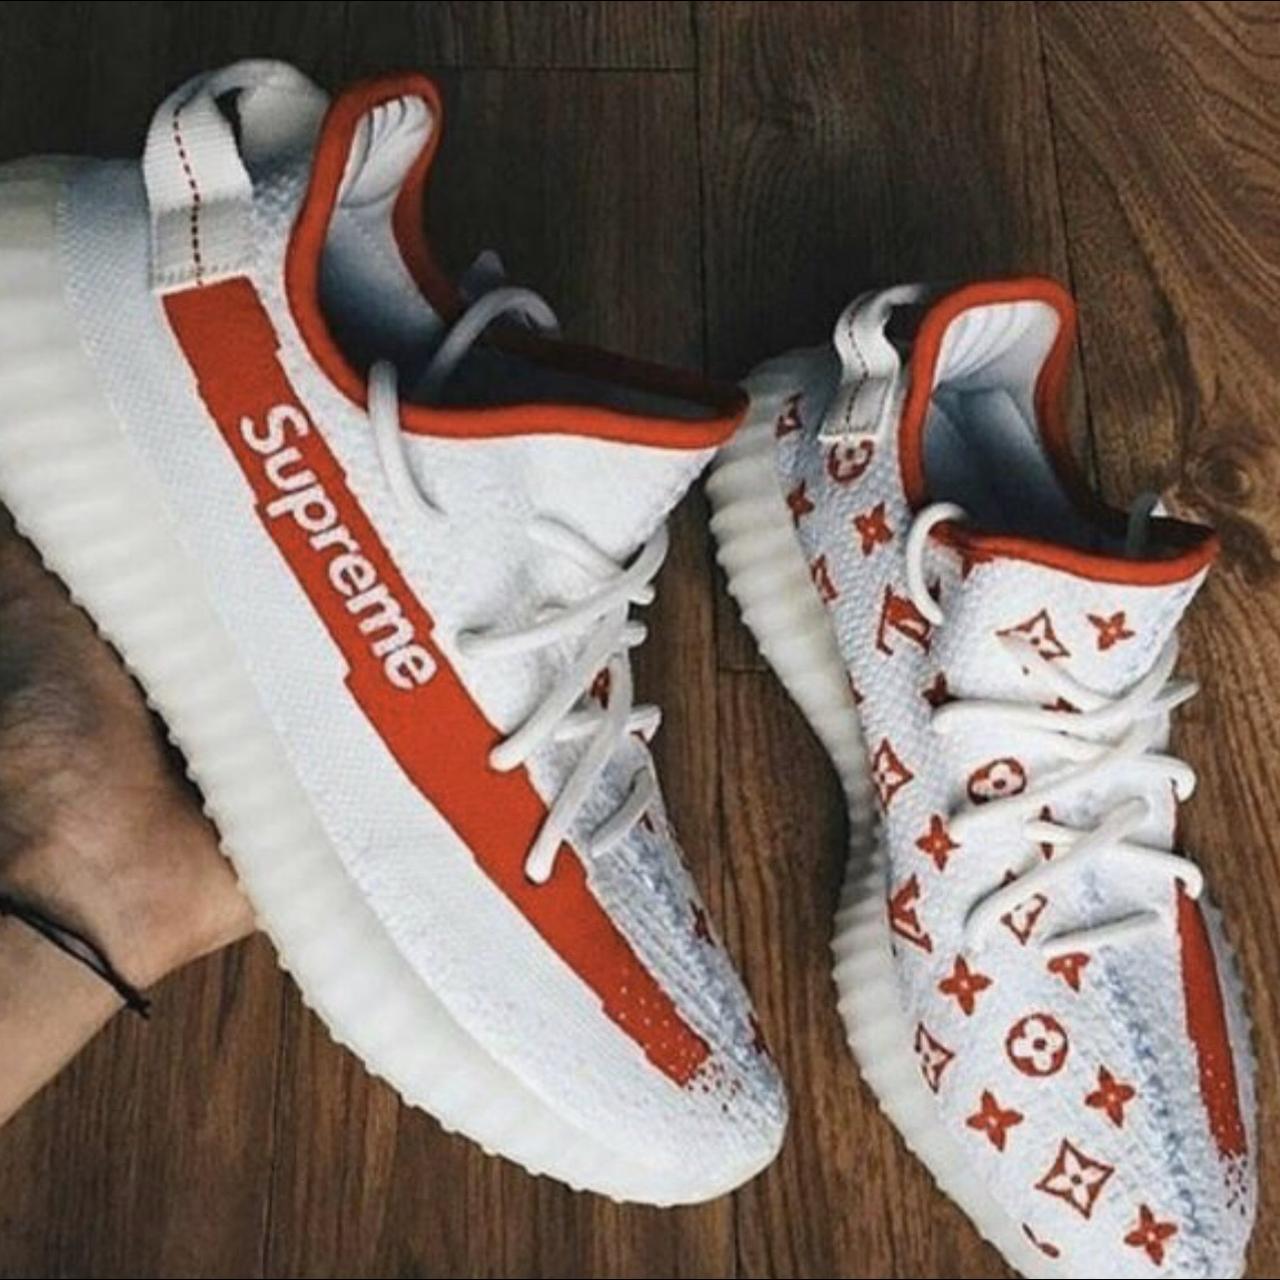 Adidas Yeezy Boost 350 v2 Supreme, Comes new In Box